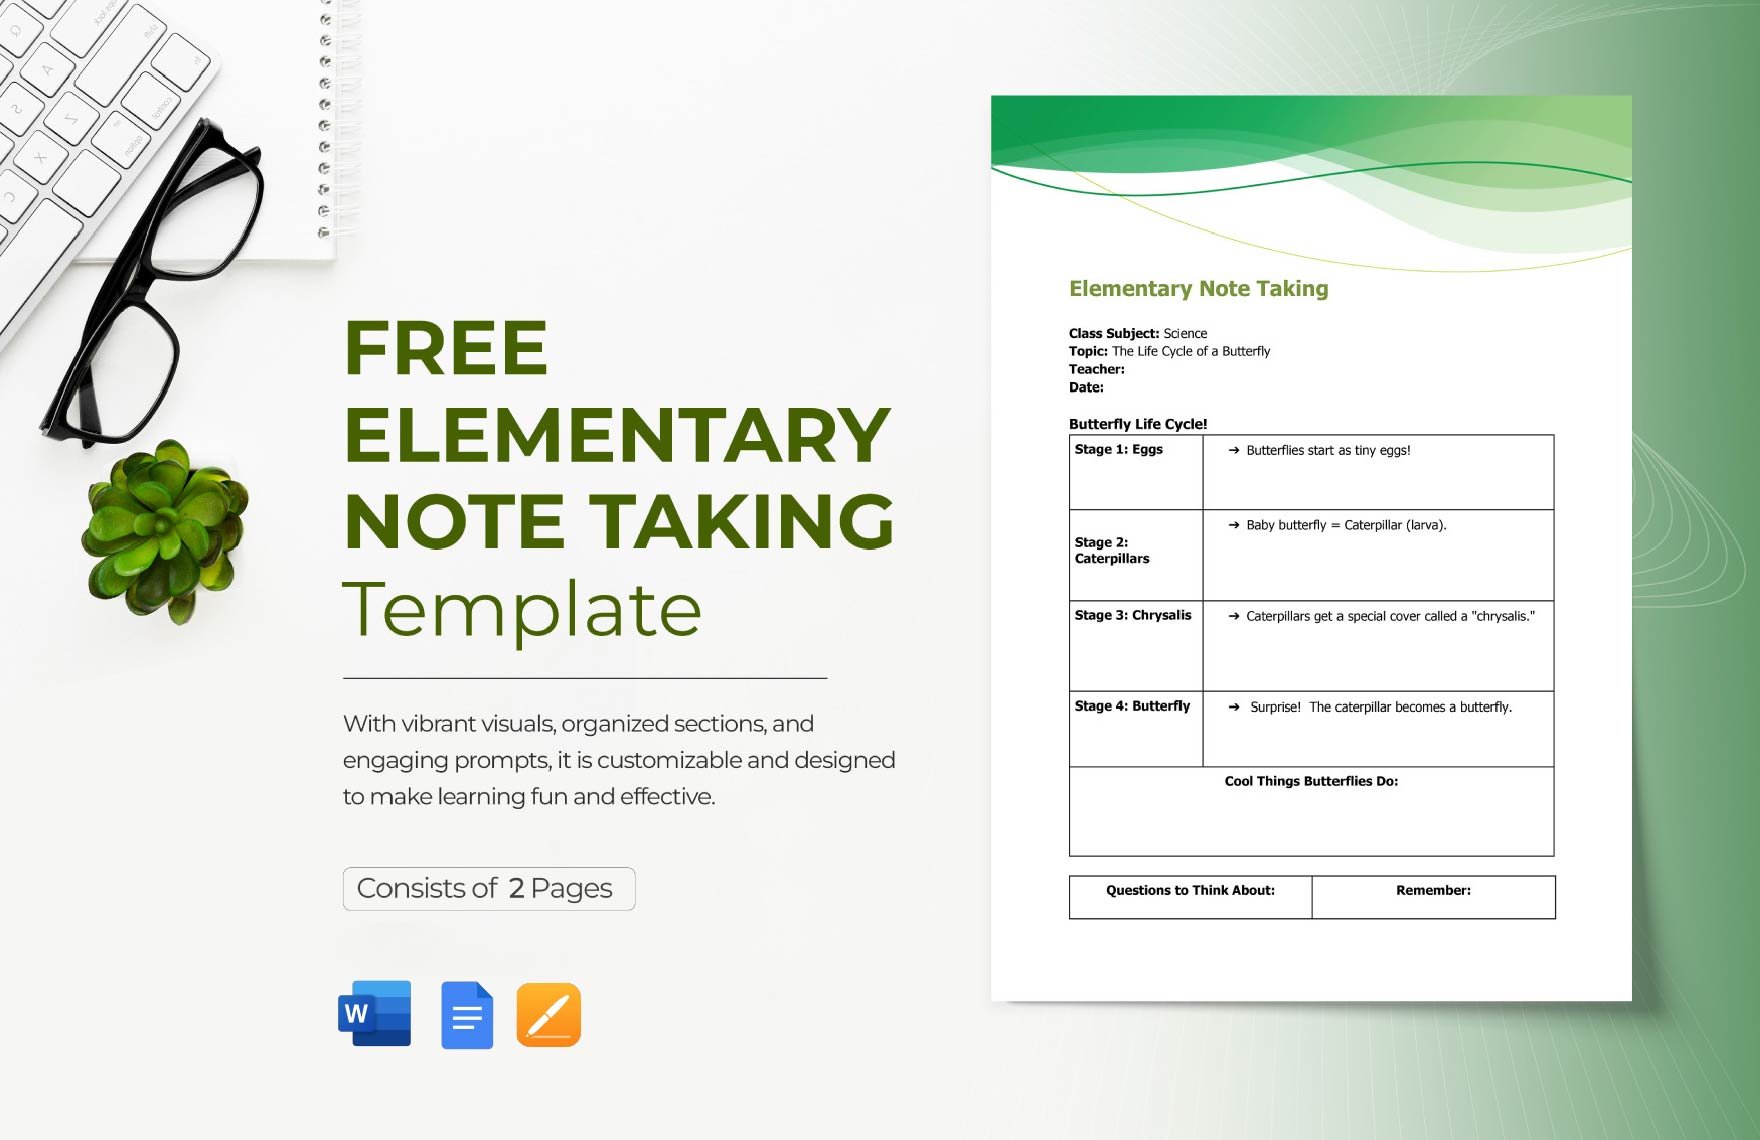 Free Elementary Note Taking Template